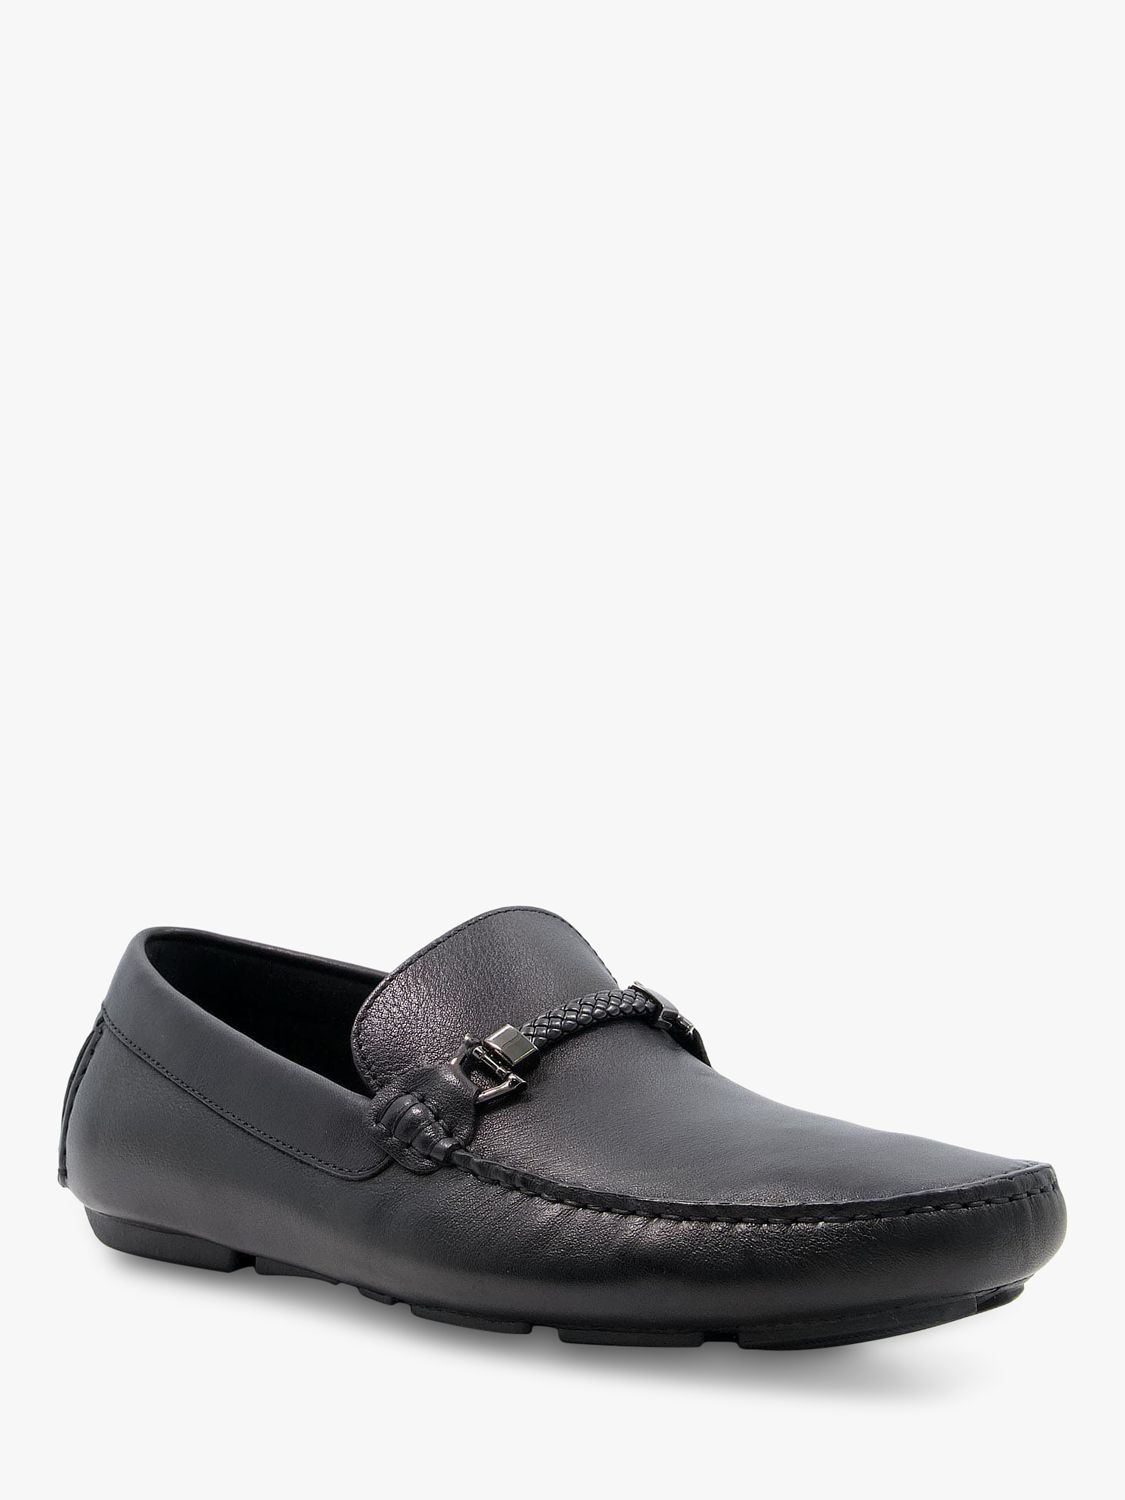 Dune Beacons Leather Loafers, Black, 6